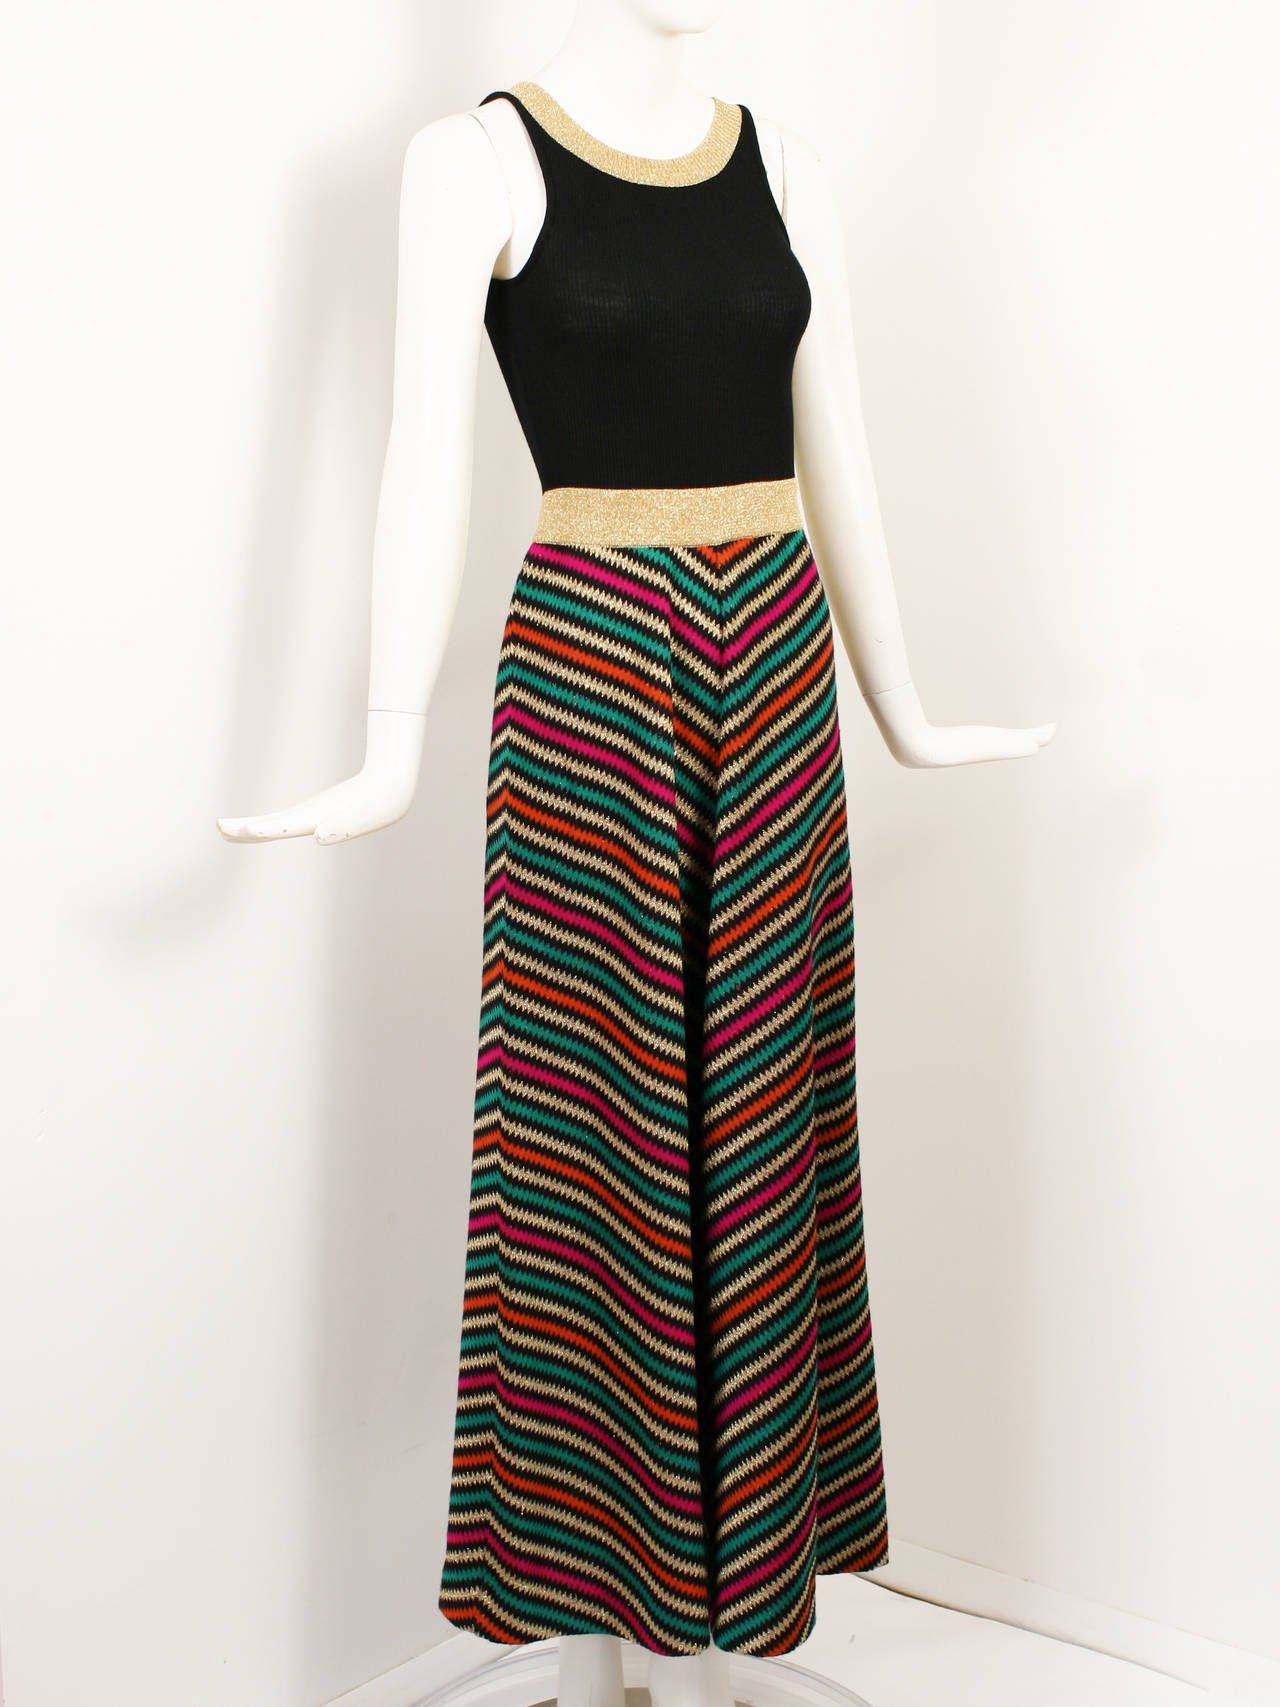 1970's Vintage Crissa Linea Italiana Knit Lame Maxi Dress. Zigzag pattern on skirt. Gold lame waist and neck band. Zipper up the back. Excellent Condition. 
x-small-small size.
Bust 28